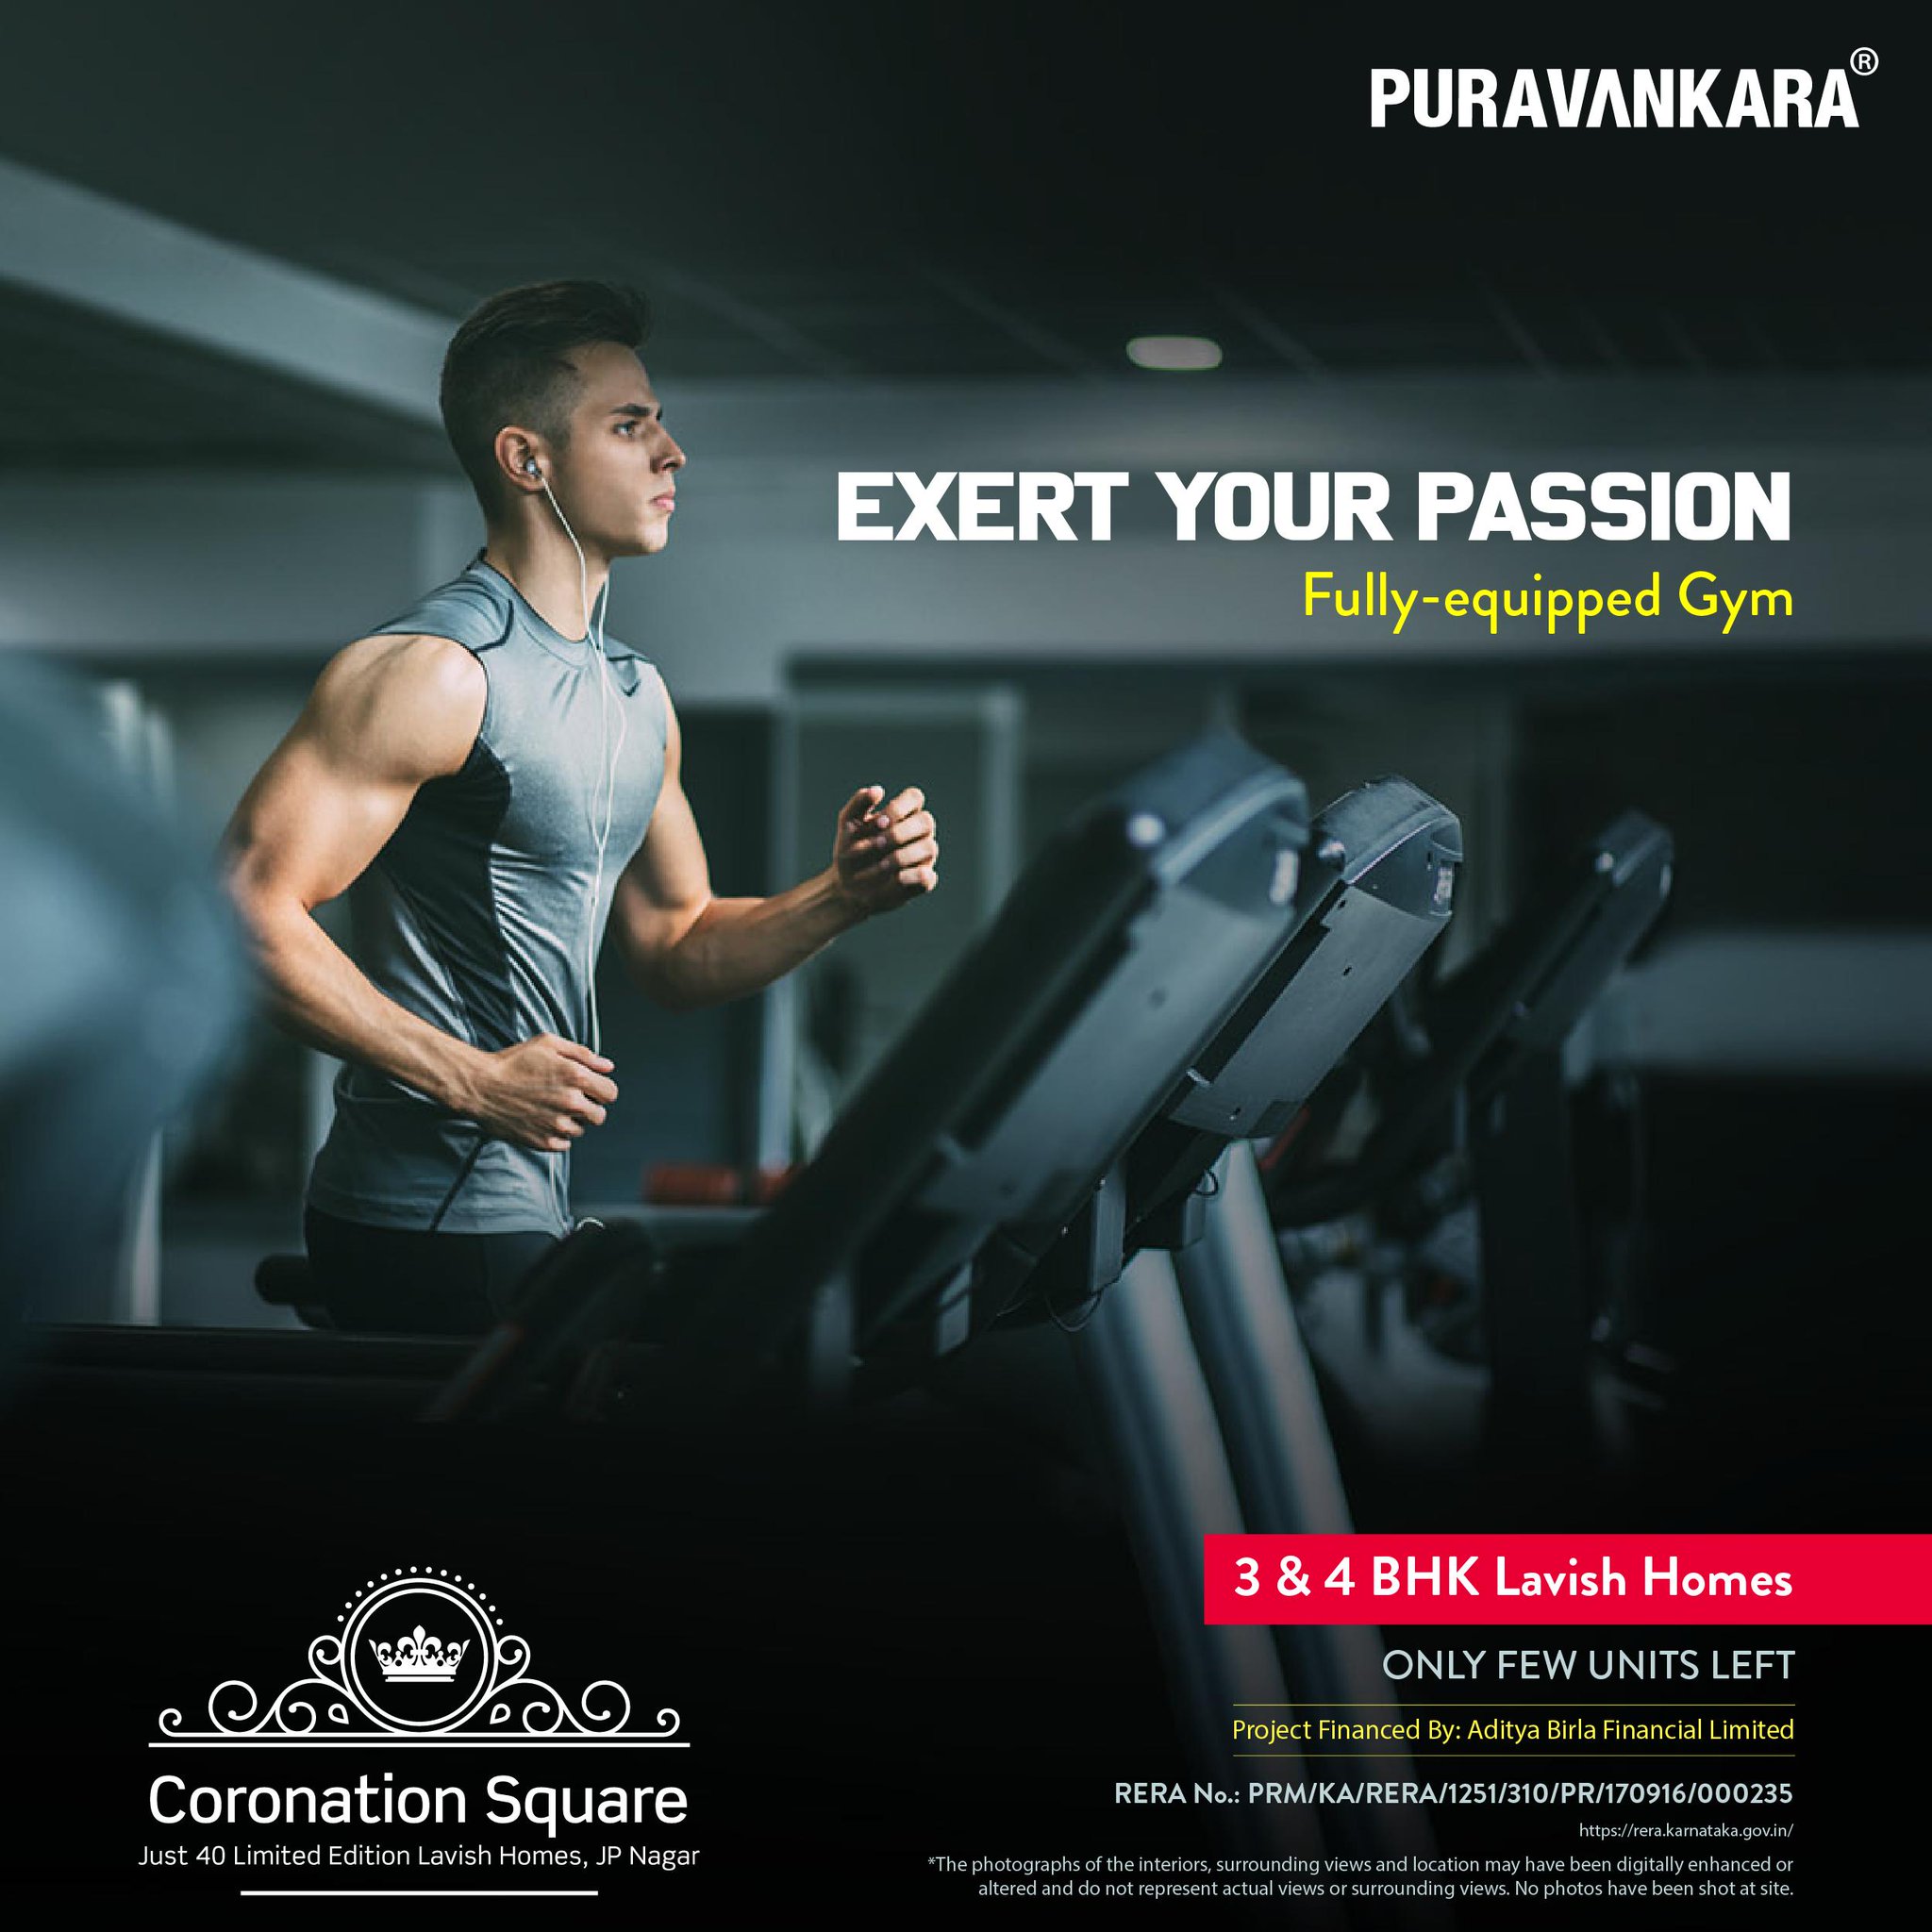 Purva Coronation Square offer fully equipped Gym in Bangalore Update